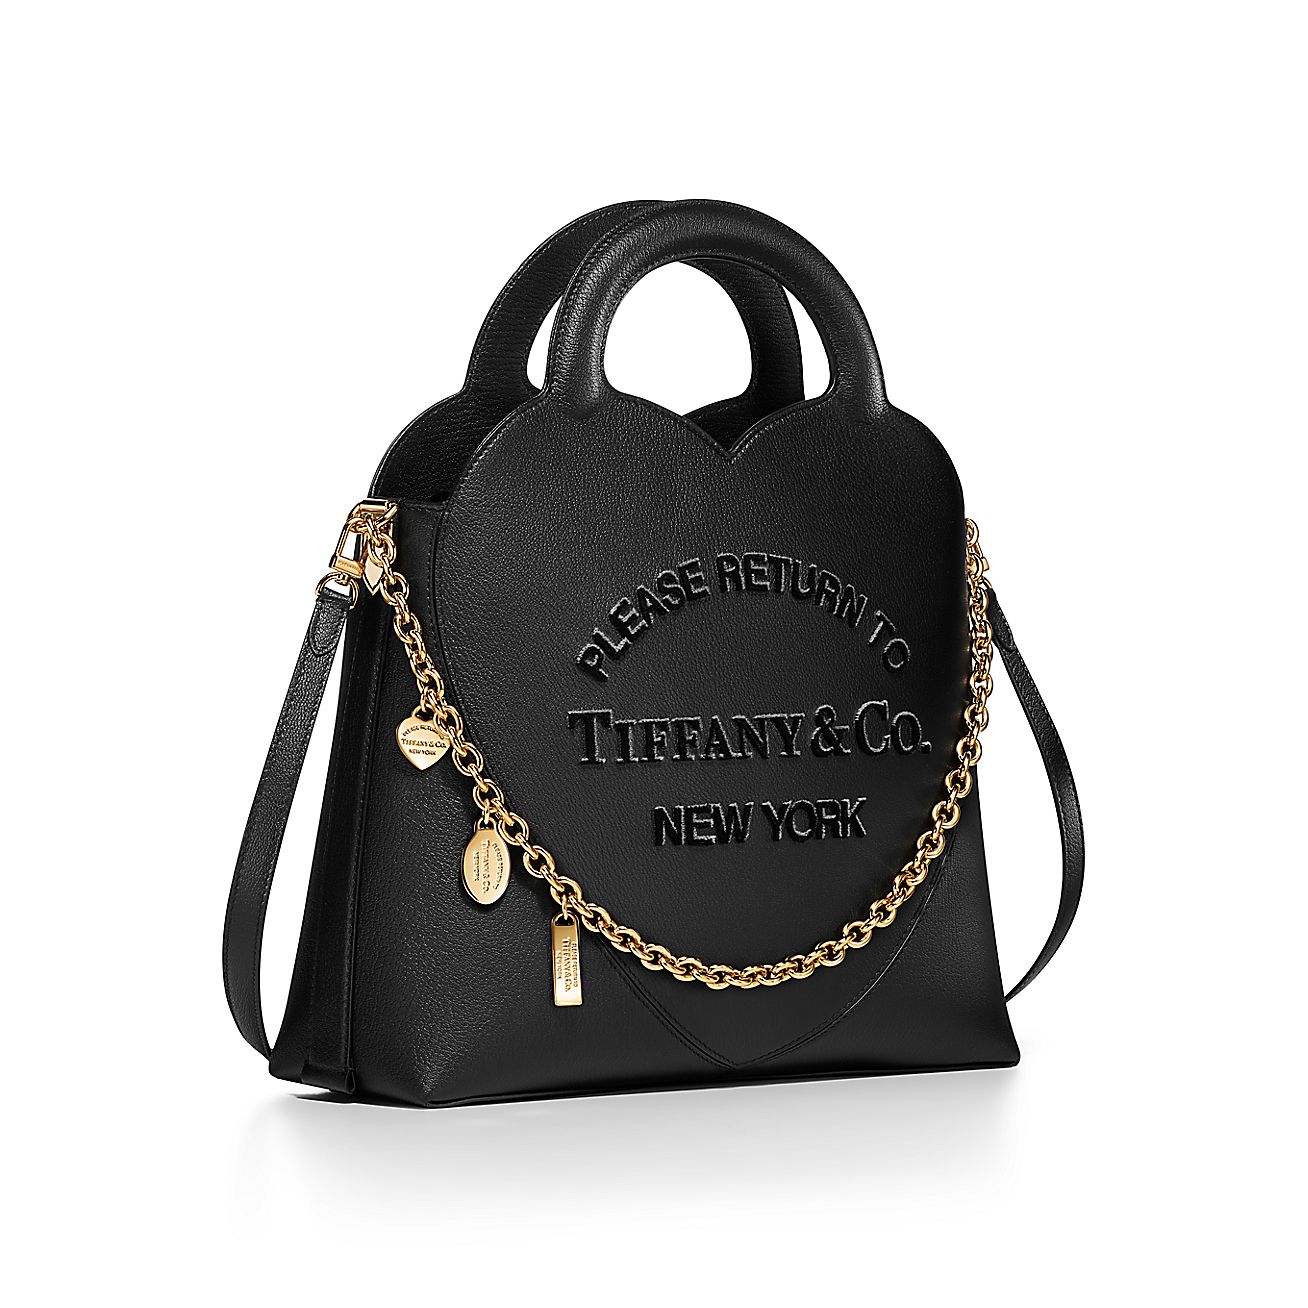 Return to Tiffany™ Small Charm Tote Bag in Black Leather | Tiffany & Co.